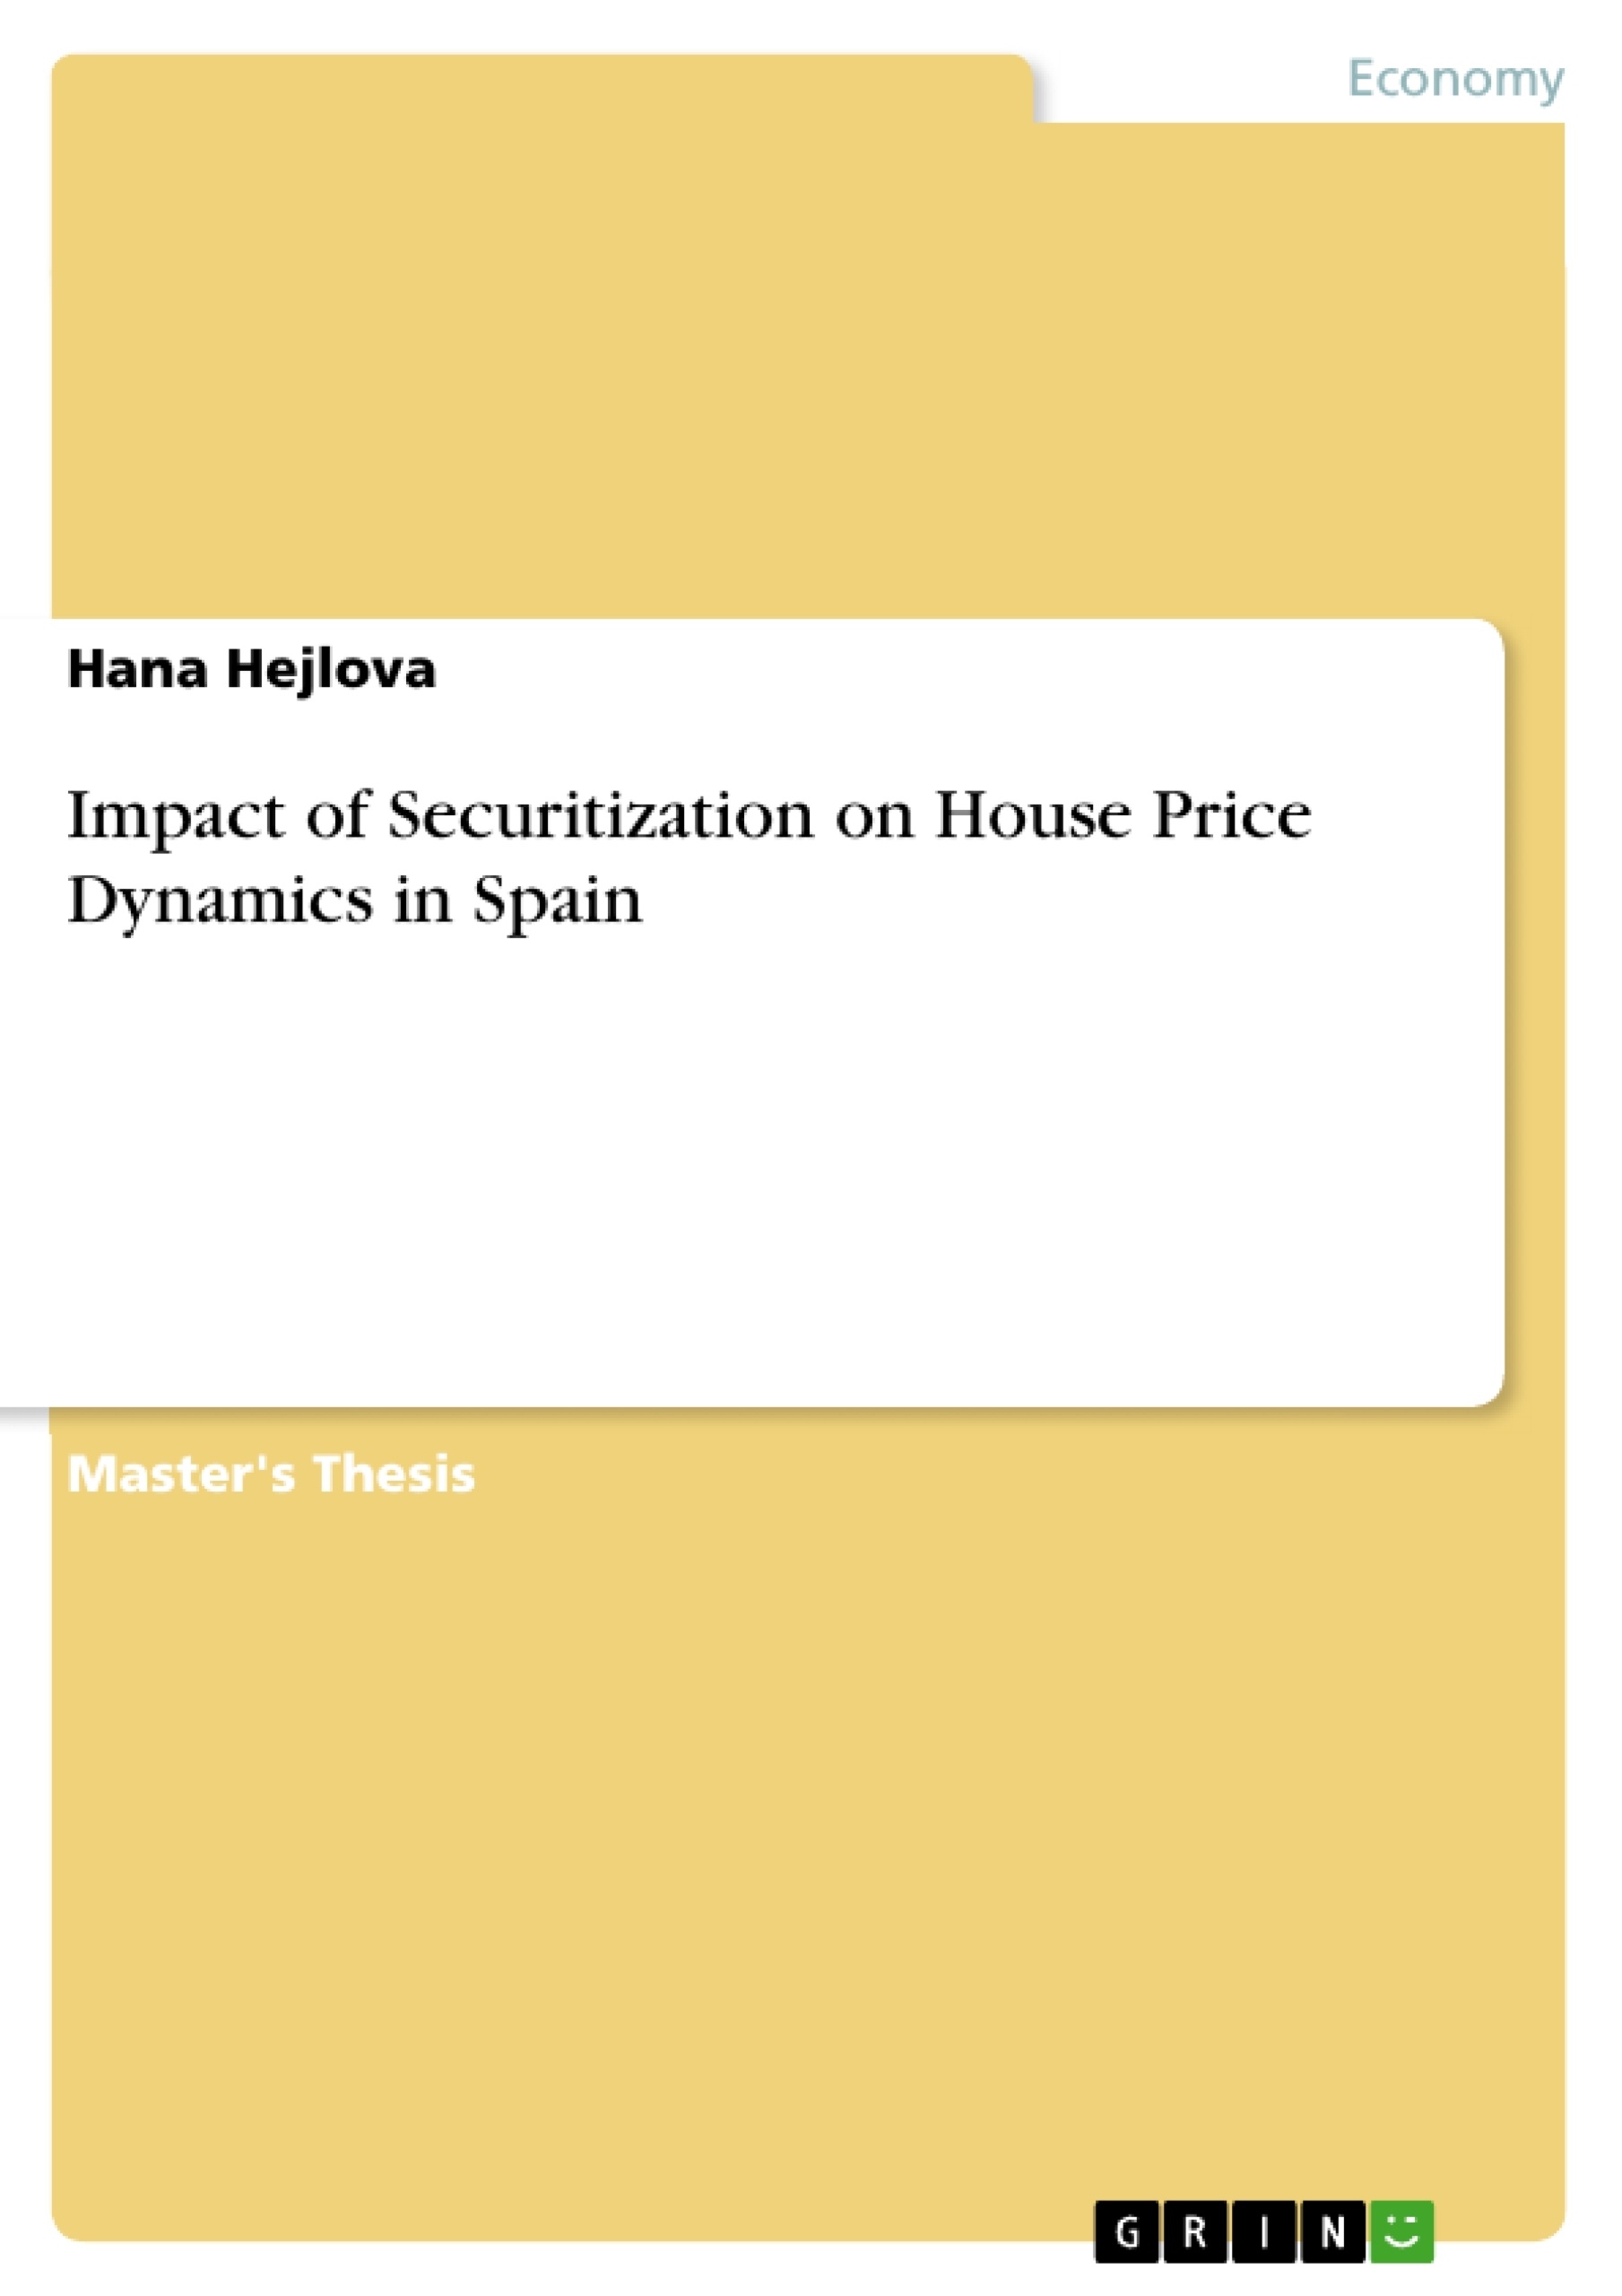 Título: Impact of Securitization on House Price Dynamics in Spain